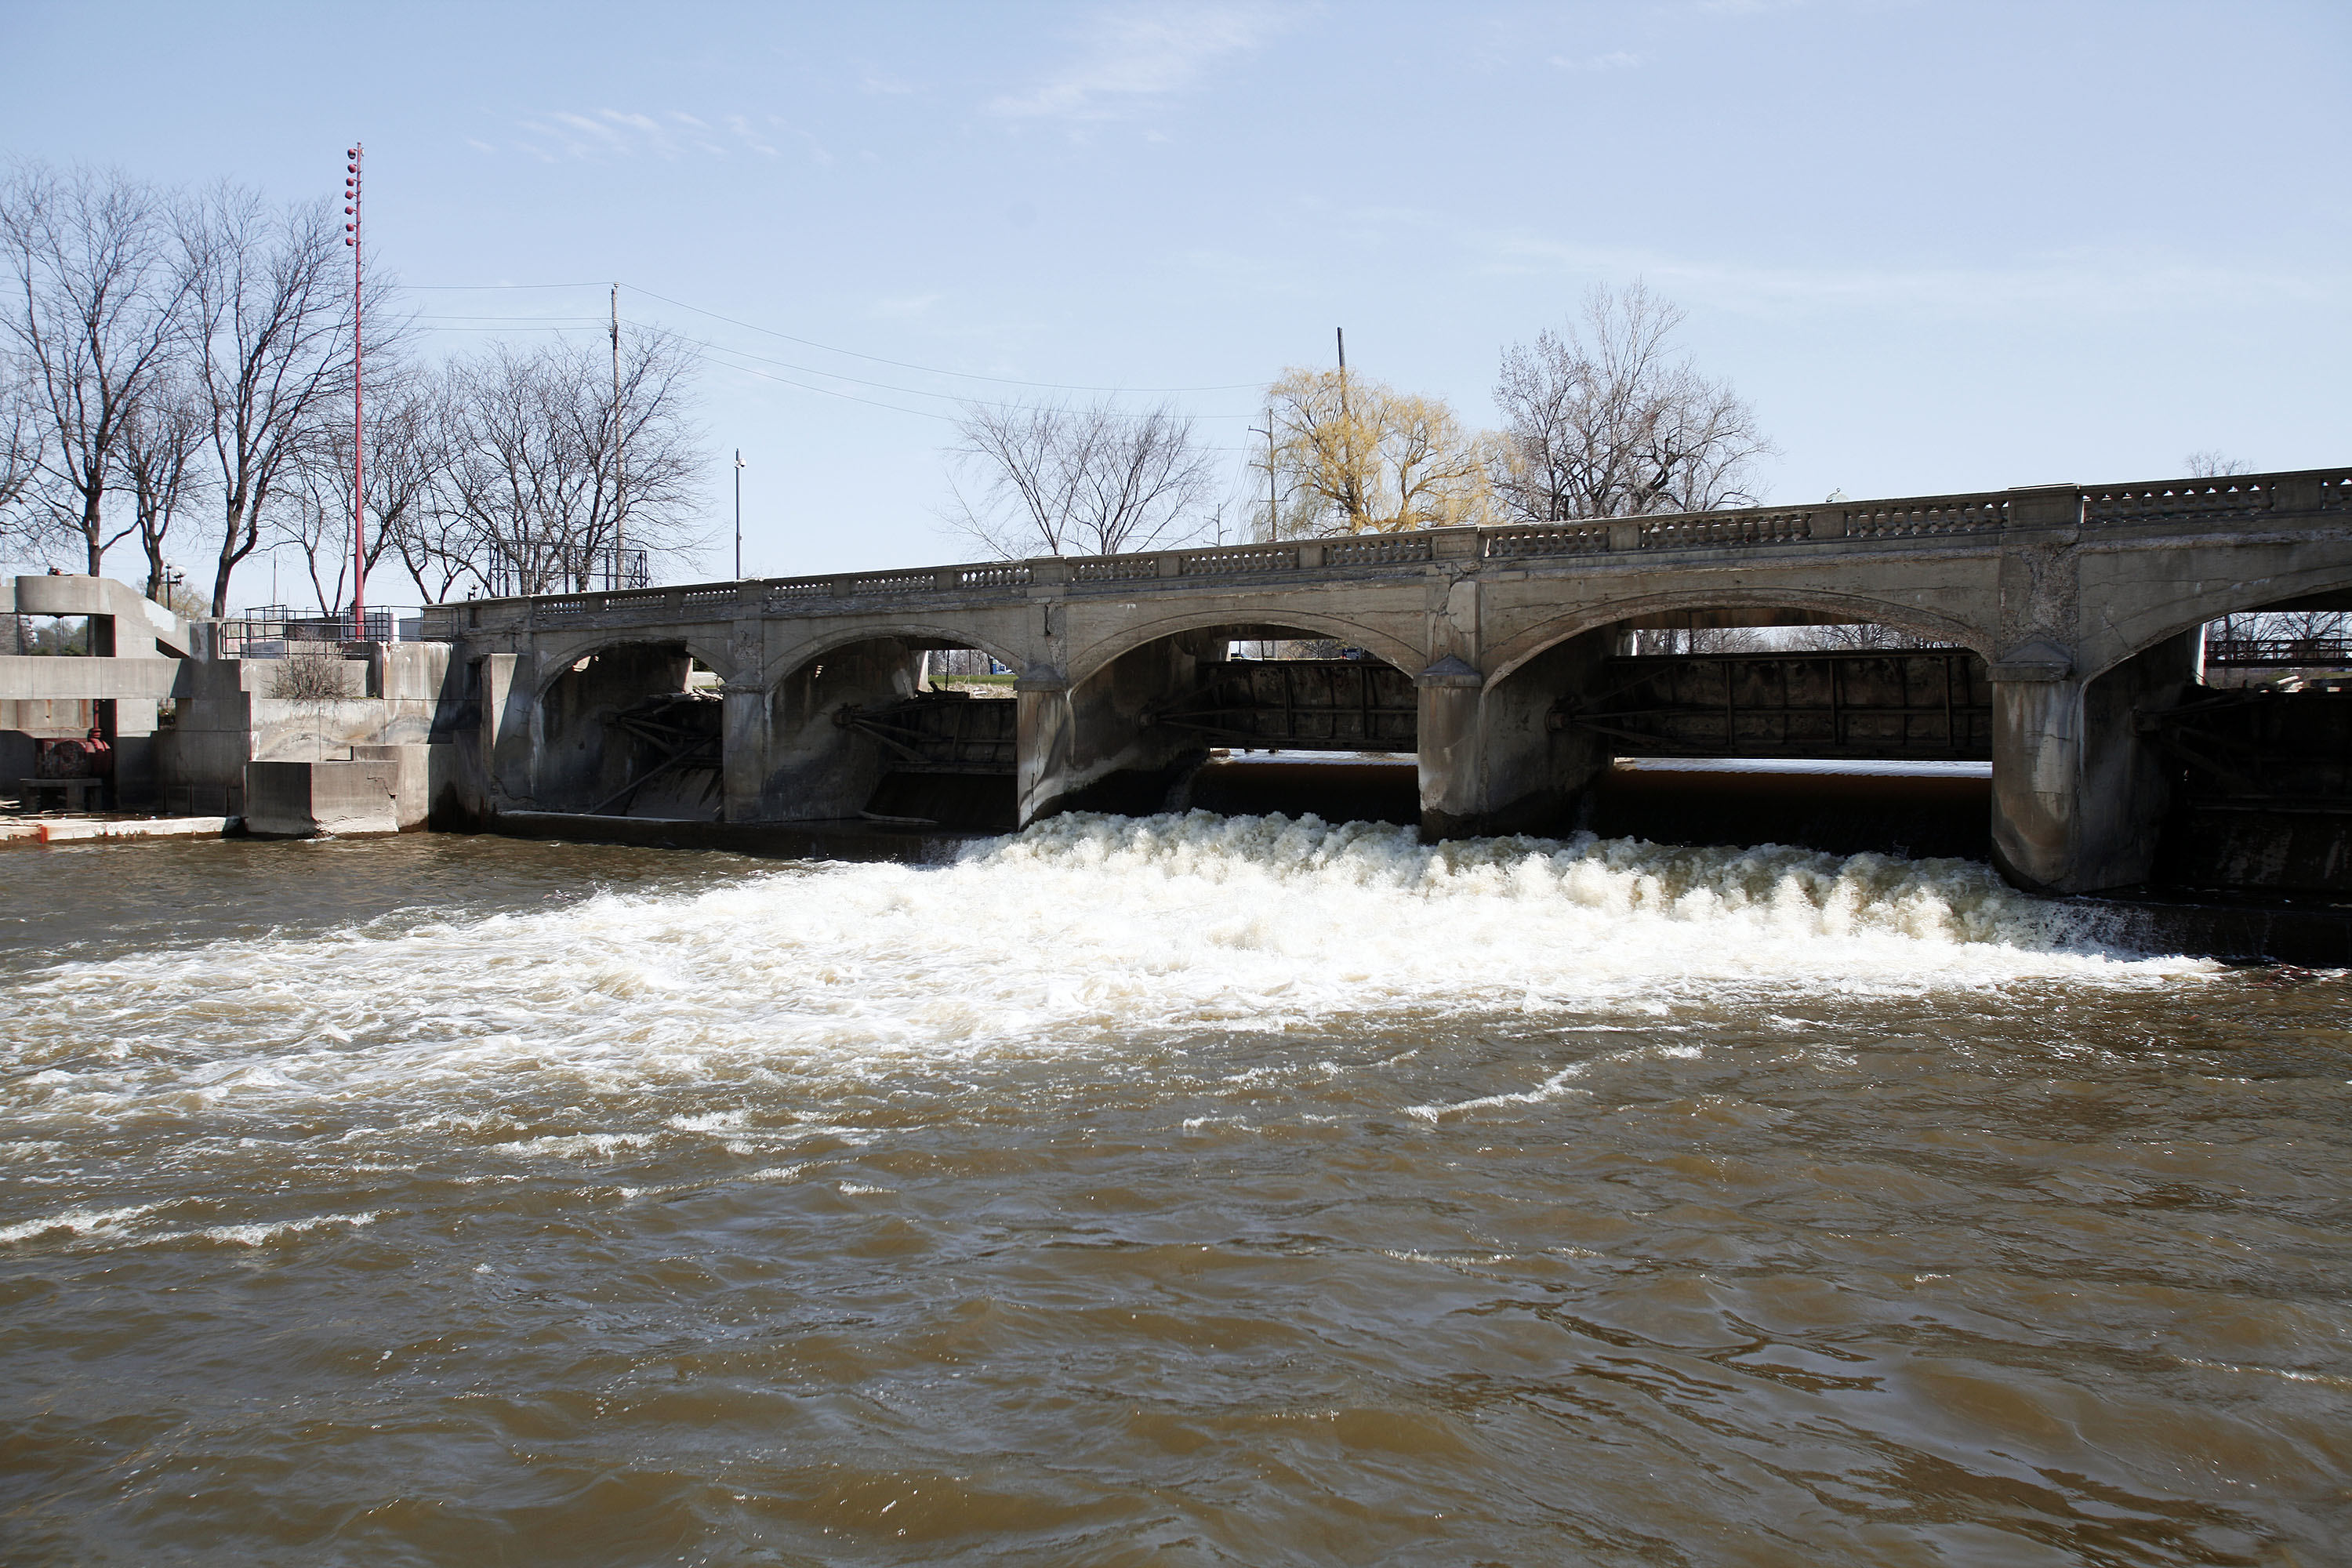 Criminal Charges Announced Over Flint Water Contamination Crisis